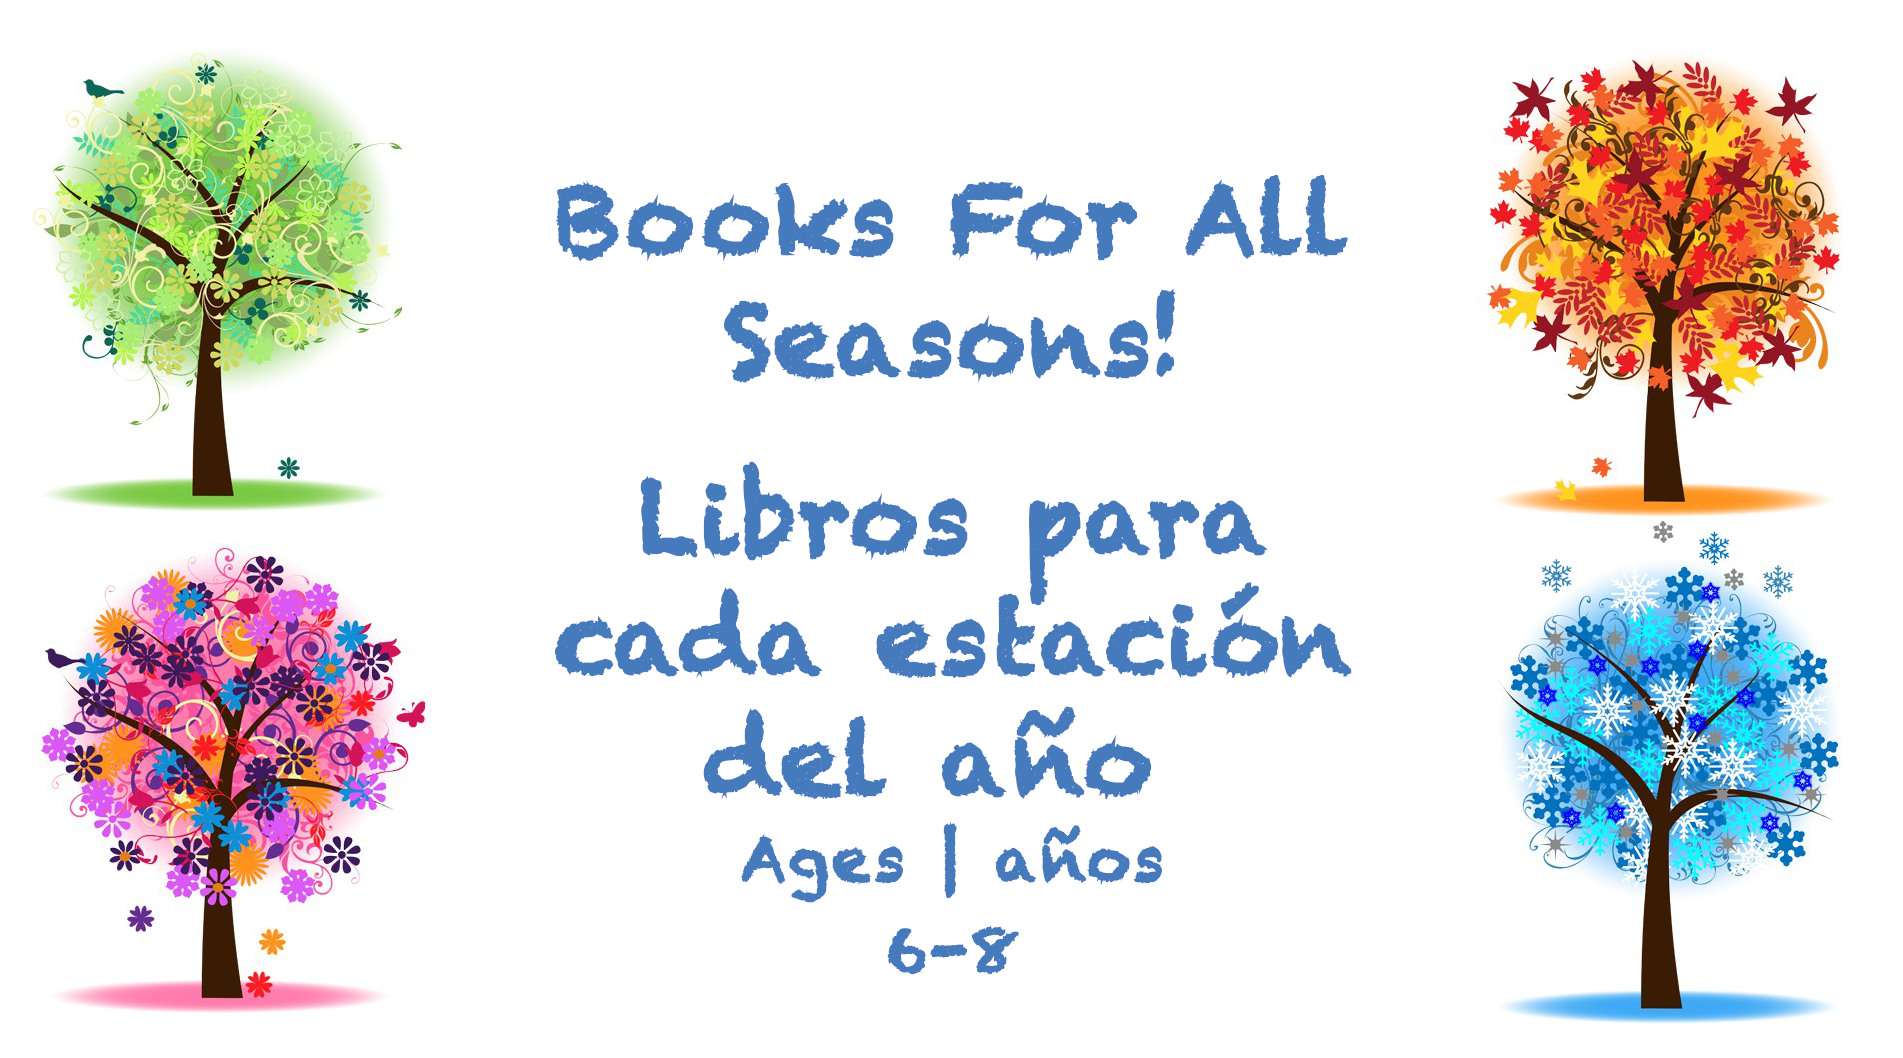 Books for All Seasons for 6-8 year olds